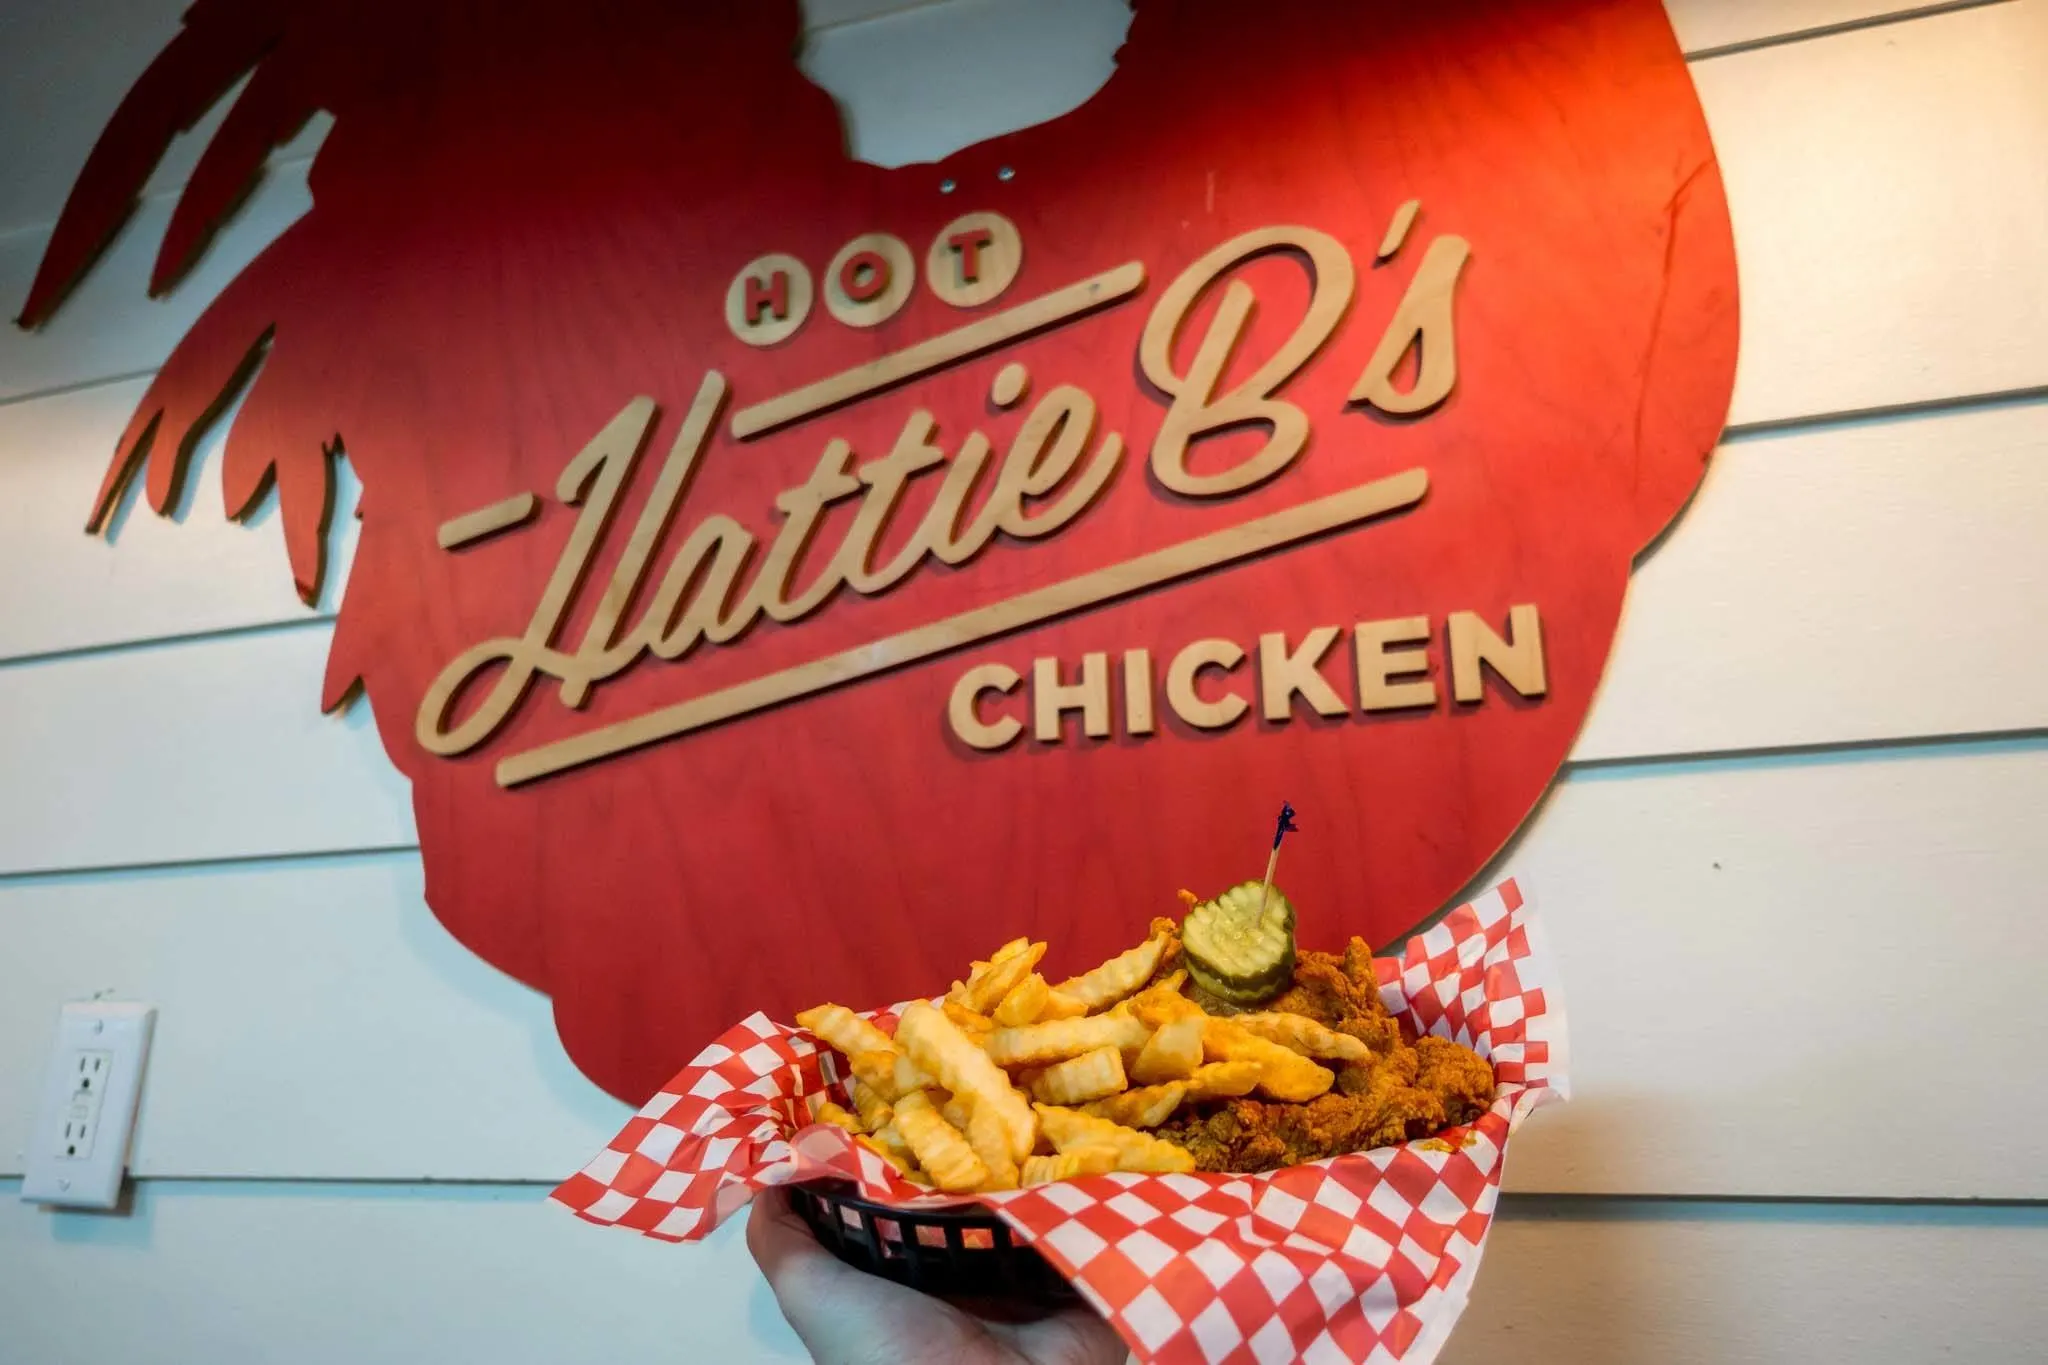 Basket of hot chicken in front of a Hattie B's sign.